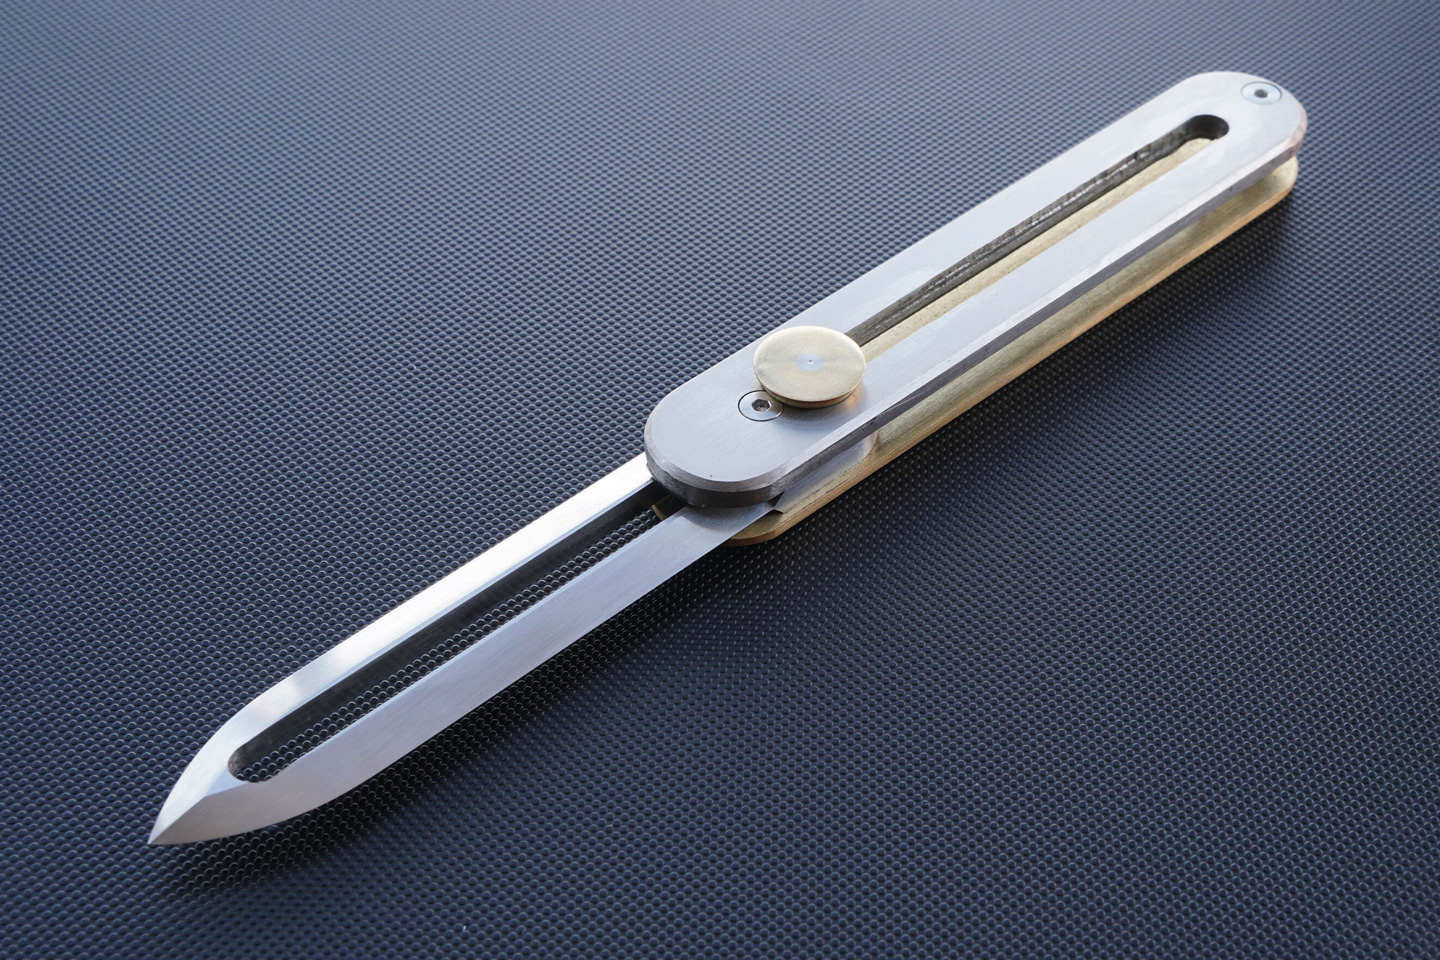 #Exquisite hand-crafted EDC knife comes with a retractable blade and an all-metal design